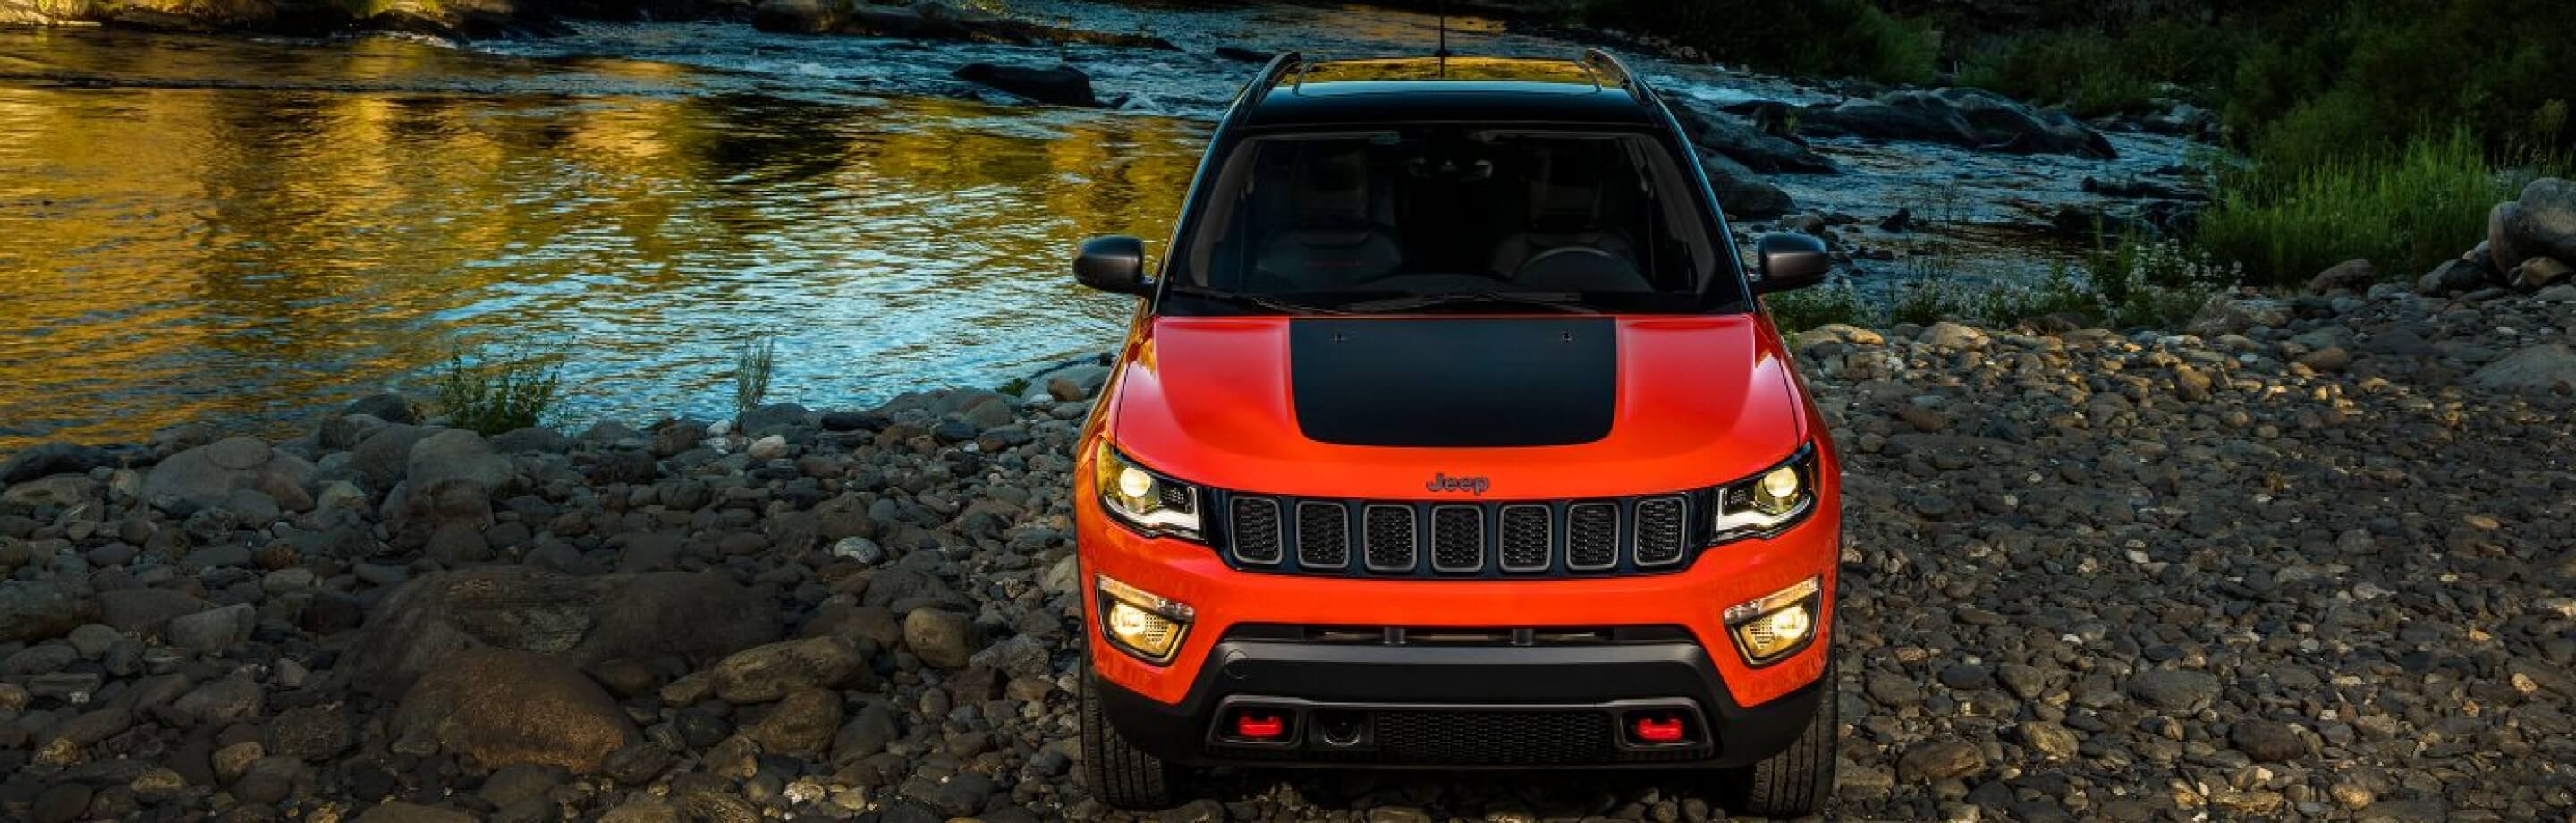 Jeep Compass : Improved compact-crossover crawls into the wild